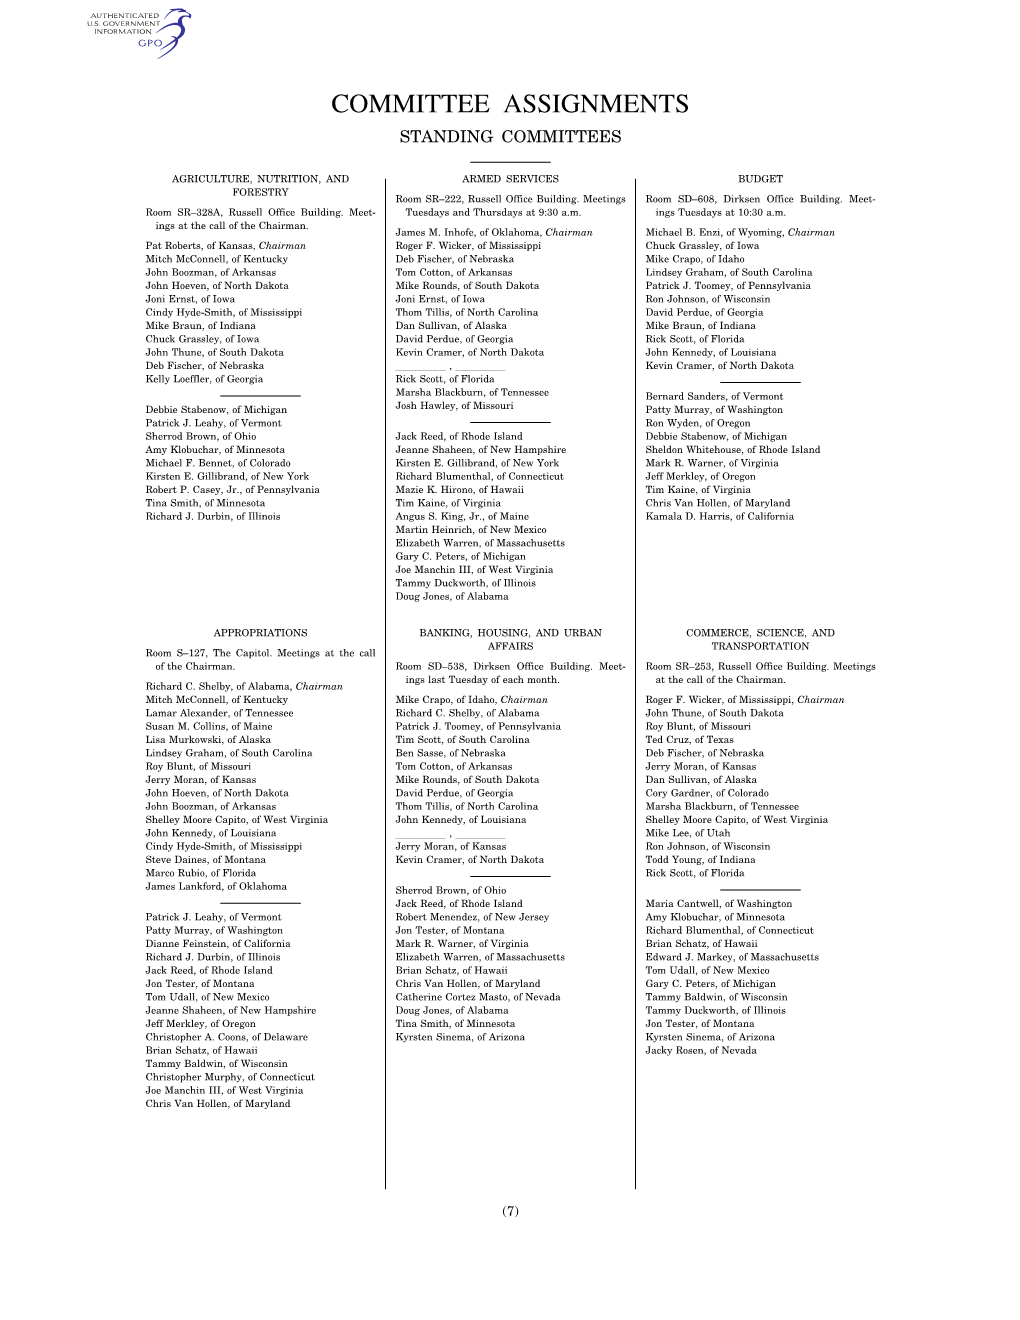 Committee Assignments Standing Committees